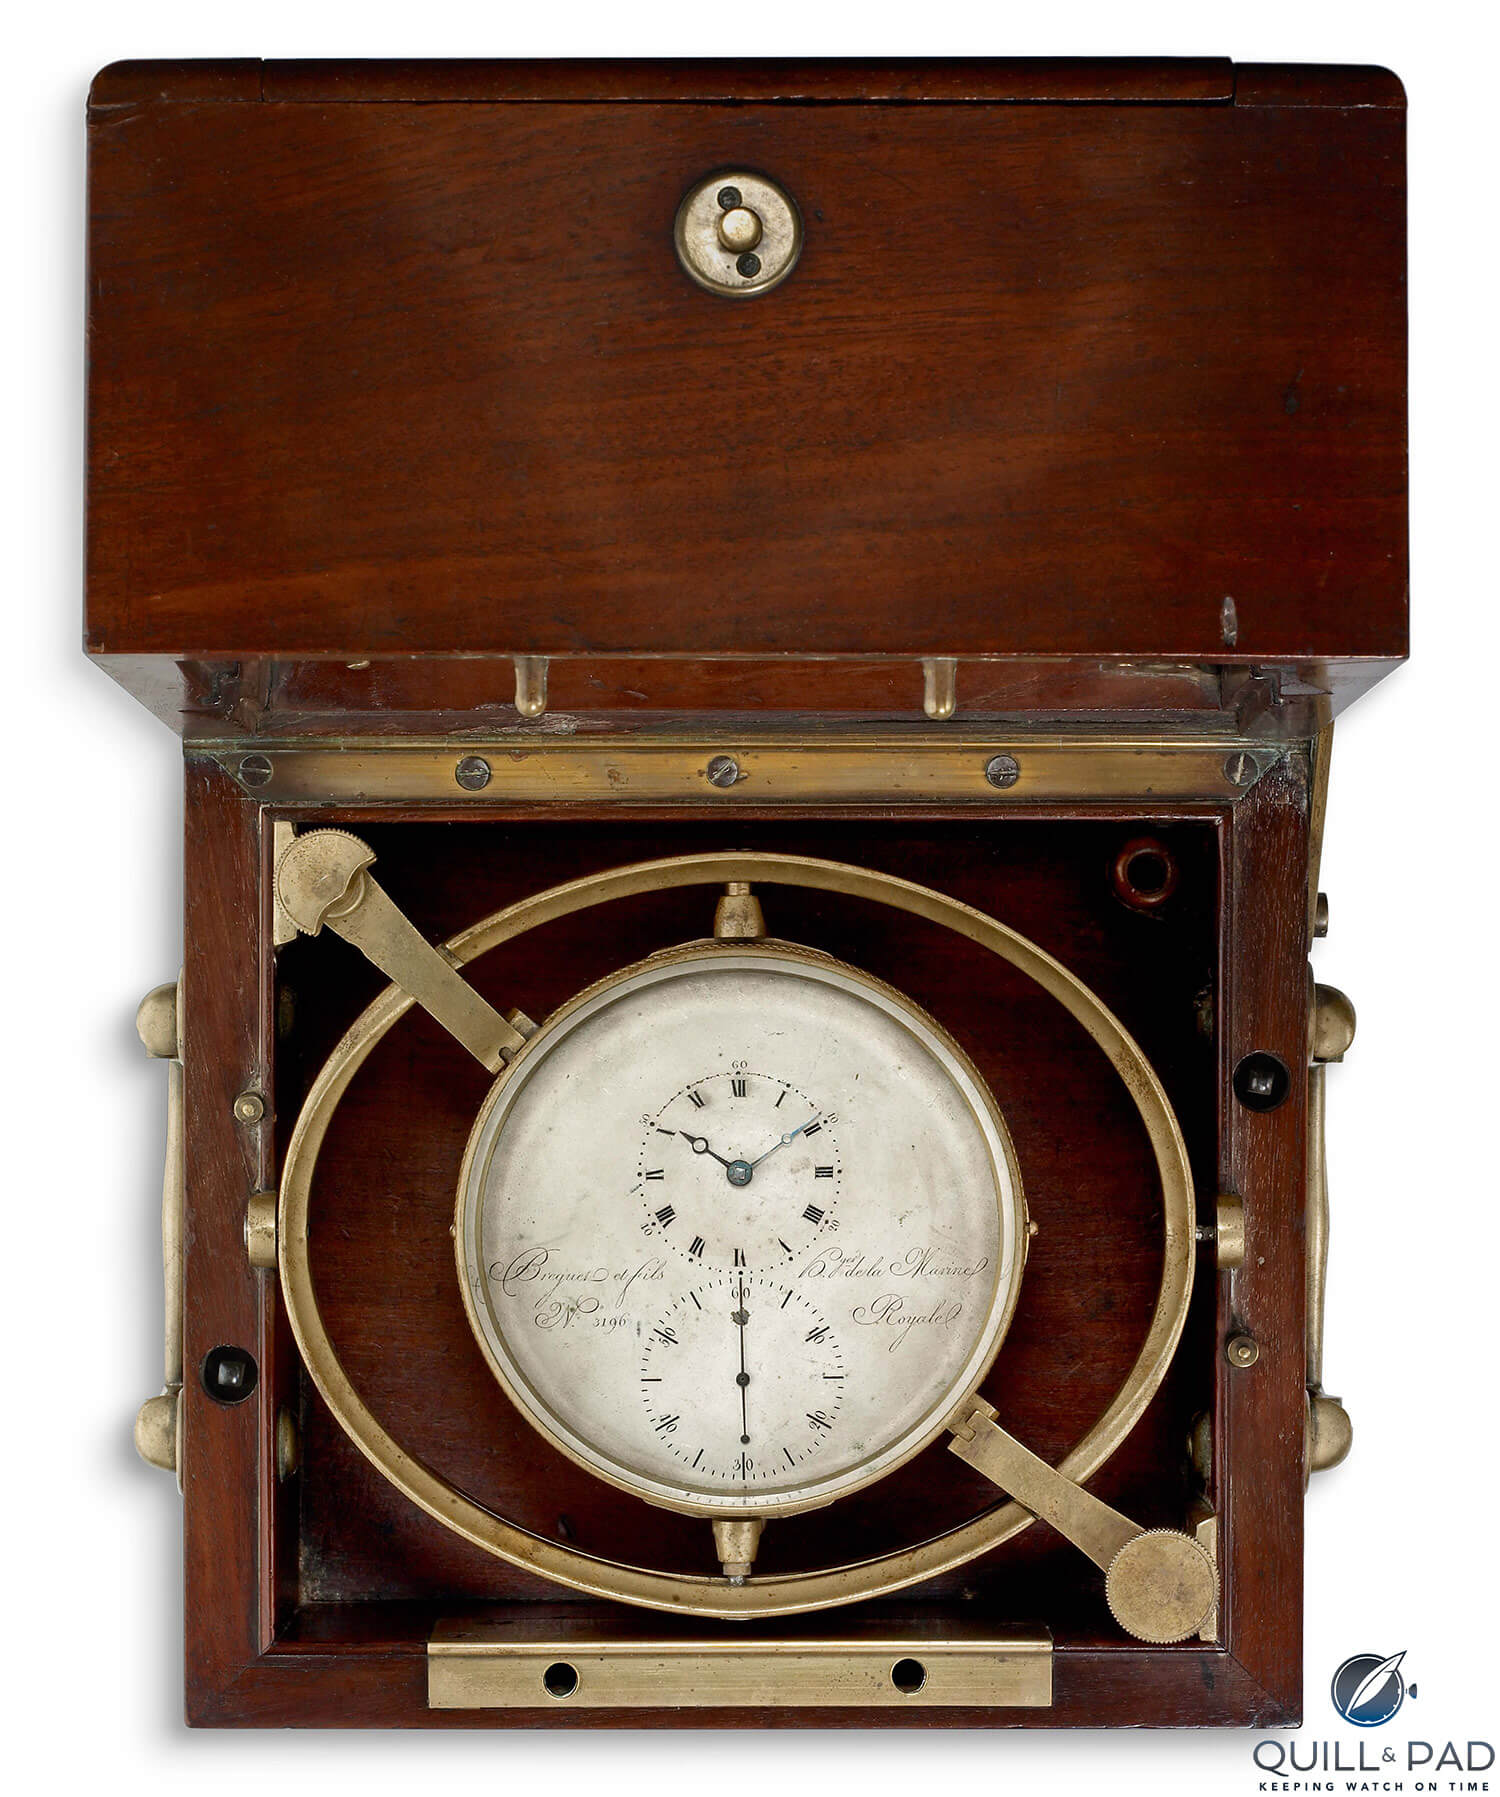 Breguet Marine Chronometer No.3196, which was sold to the French navy in 1822